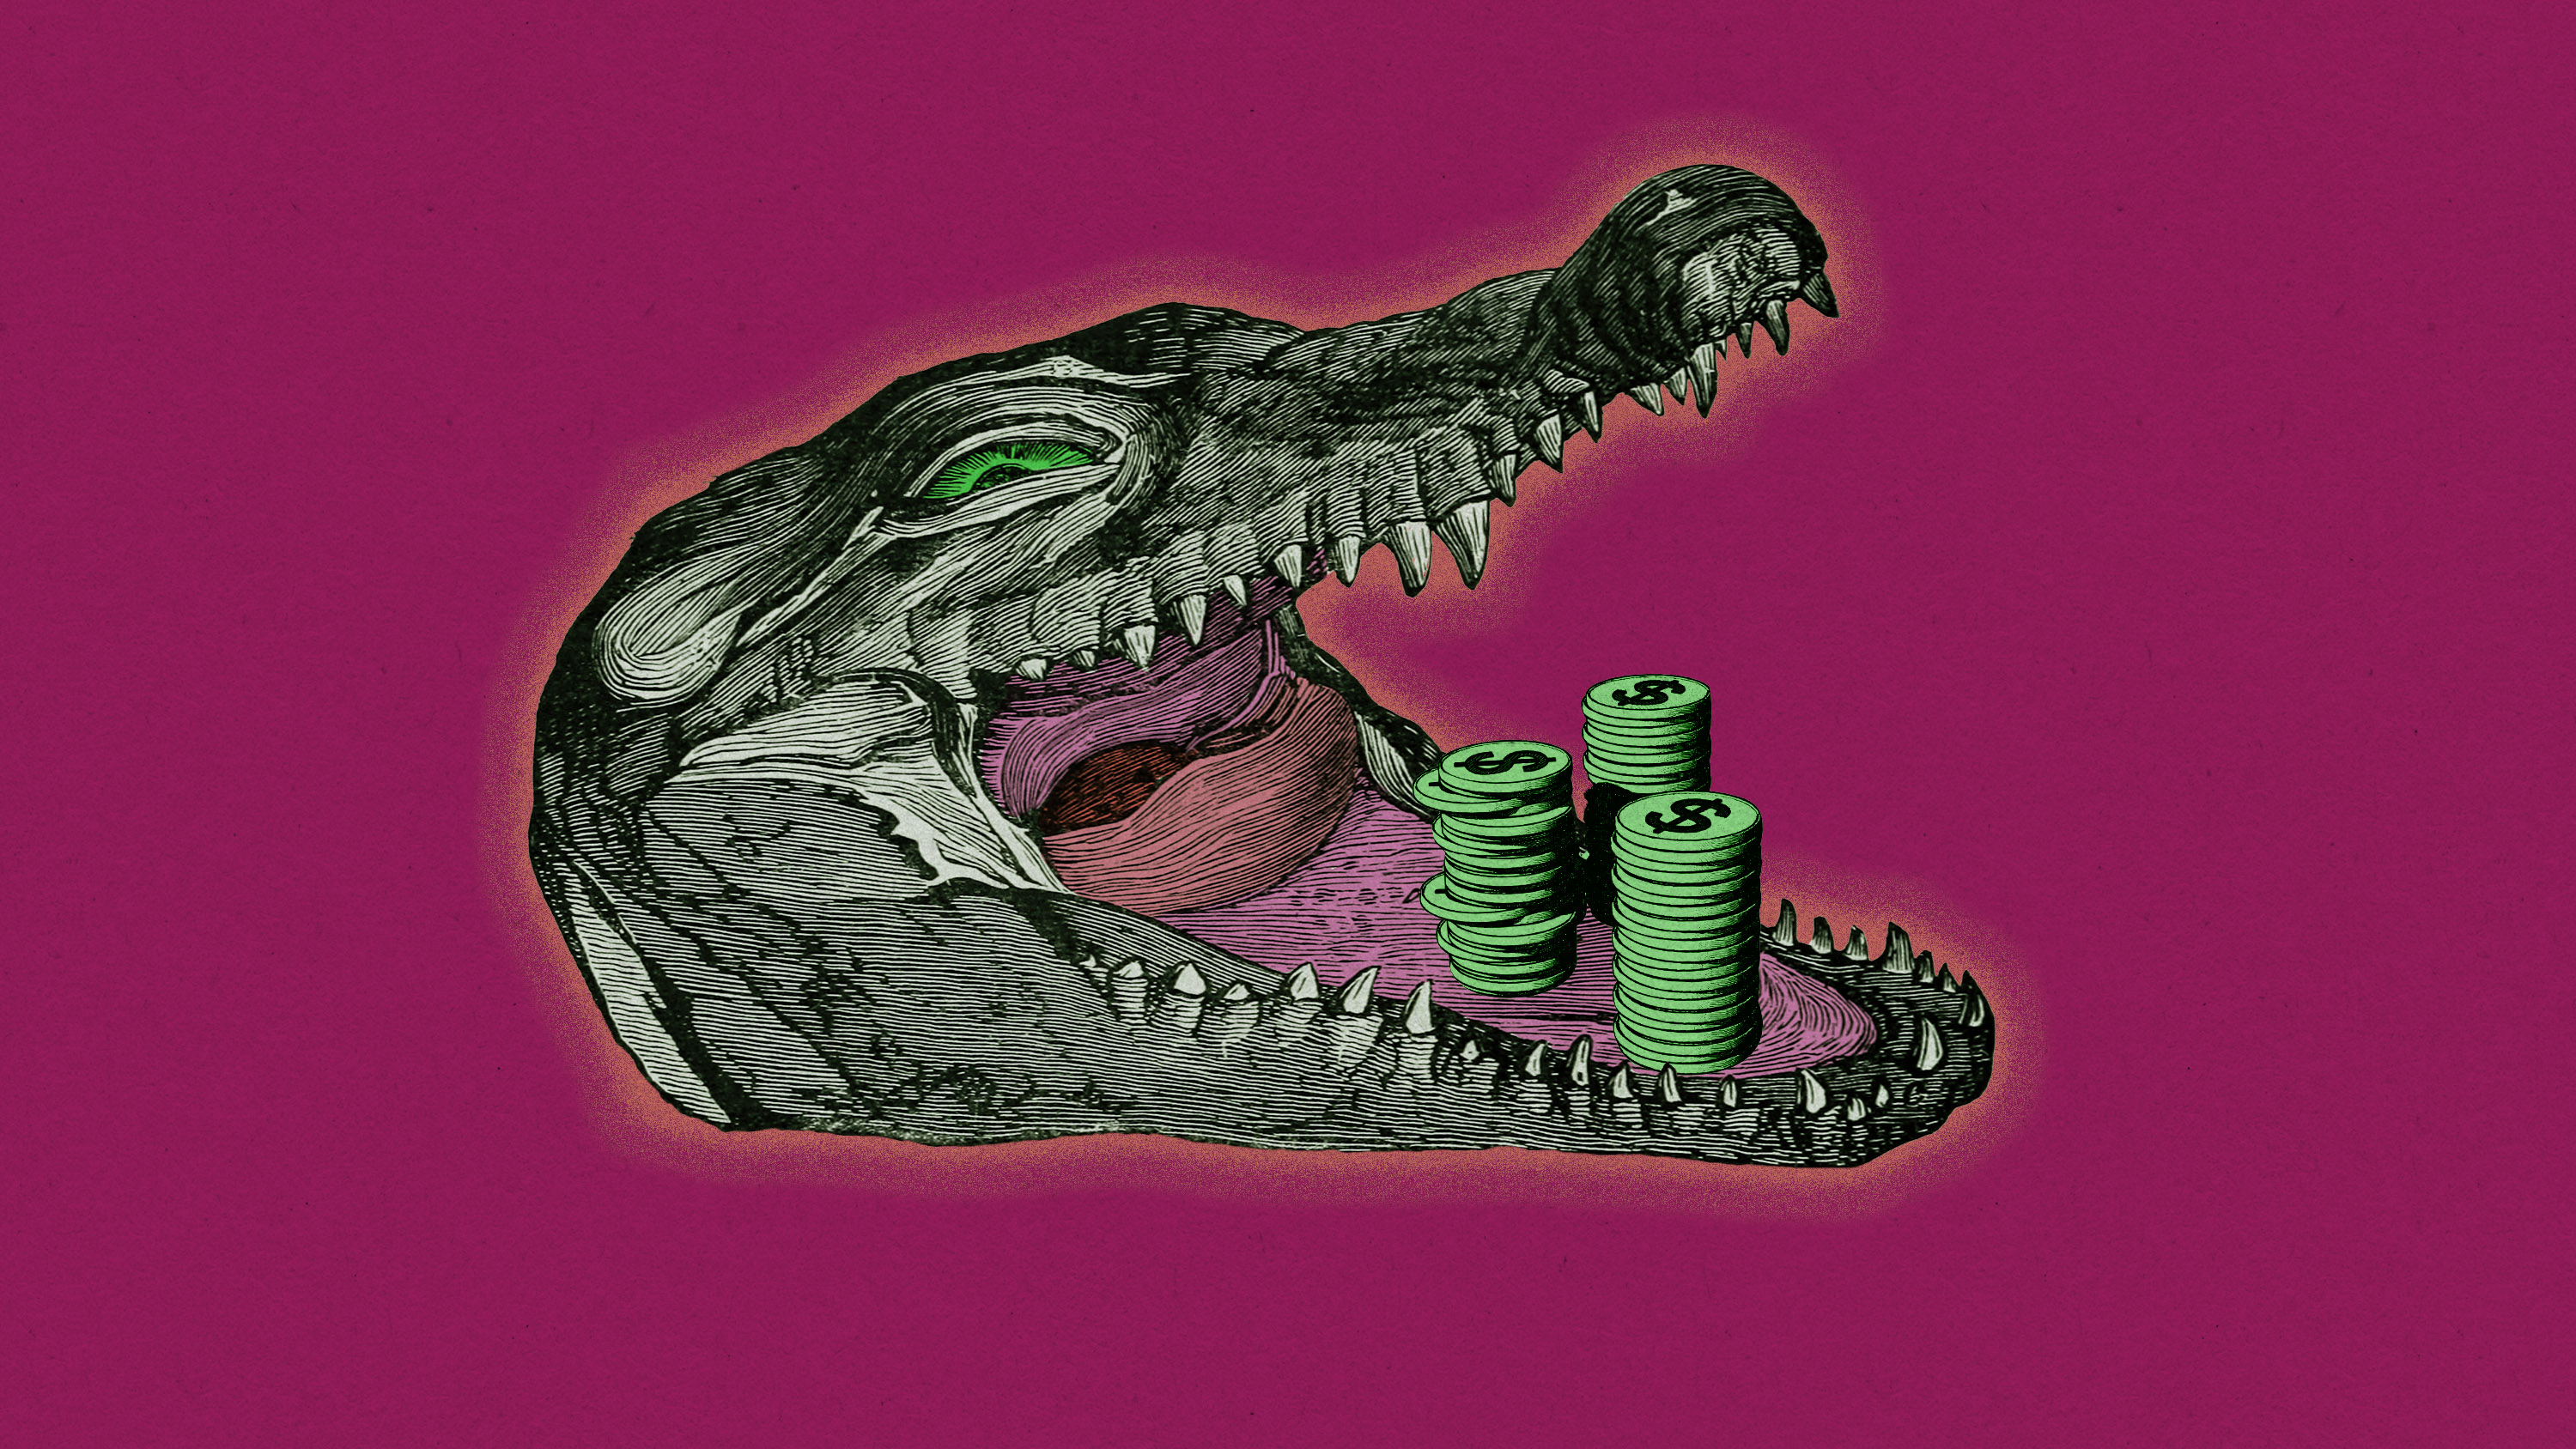 the head of a glowing crocodile with stacks of coins in its open mouth